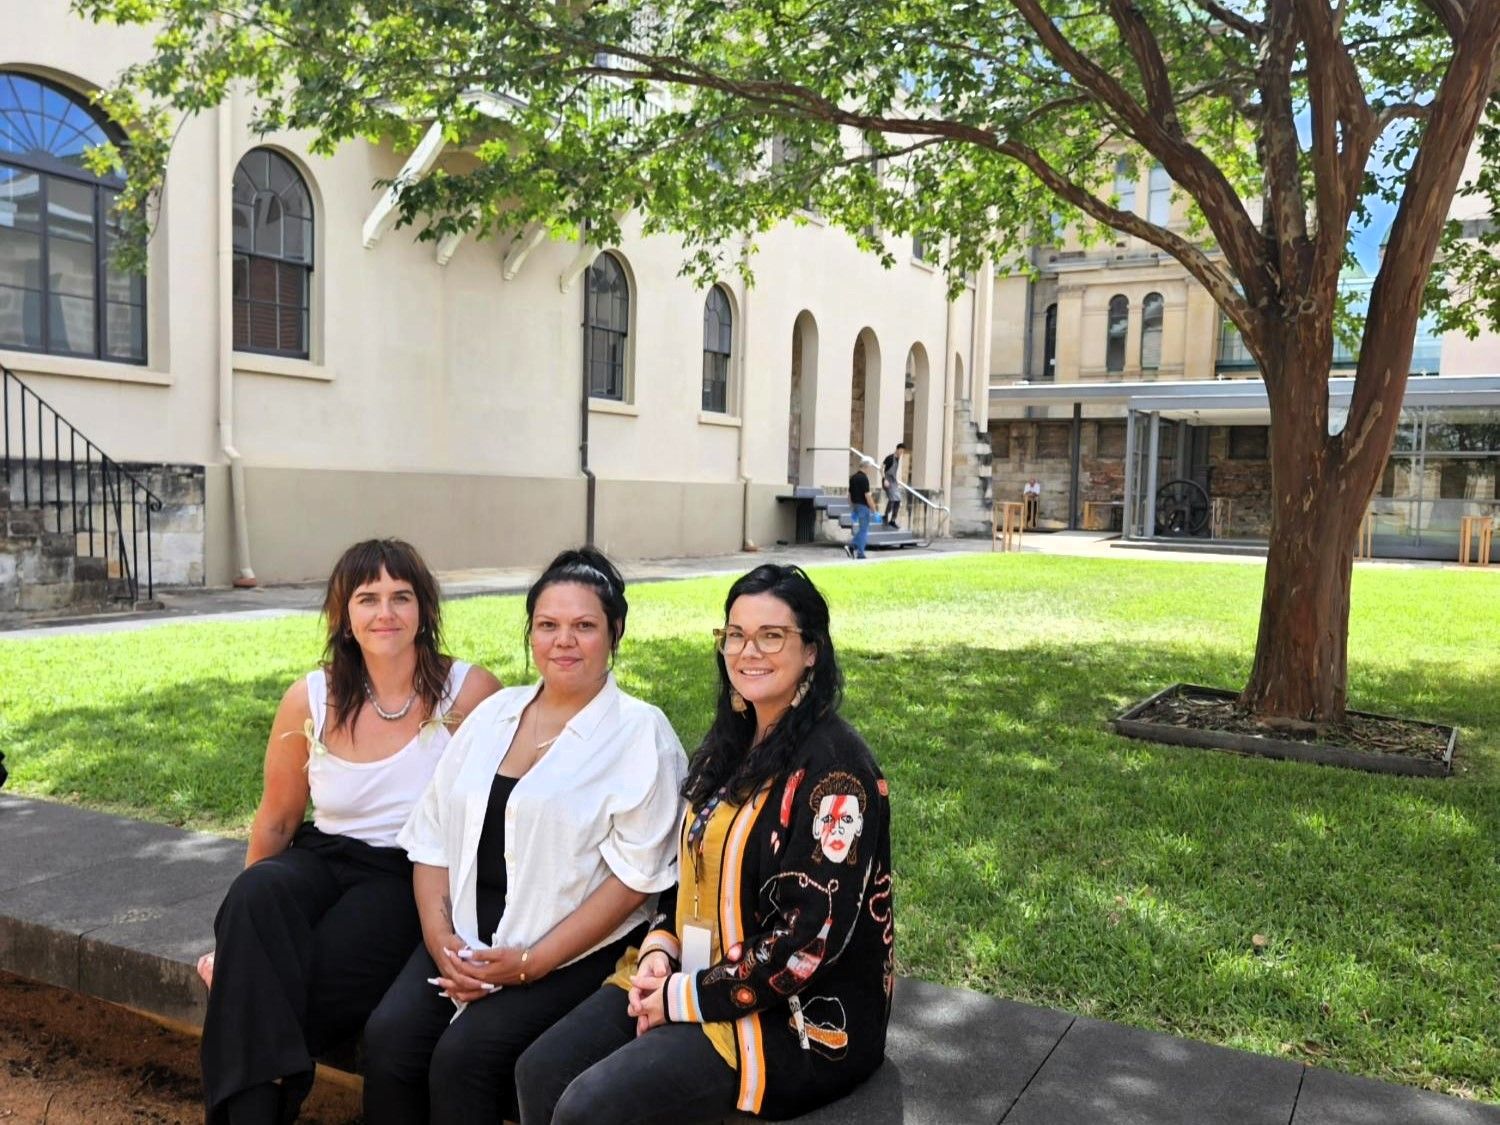 Three women sit on a sandstone fence in front of a building